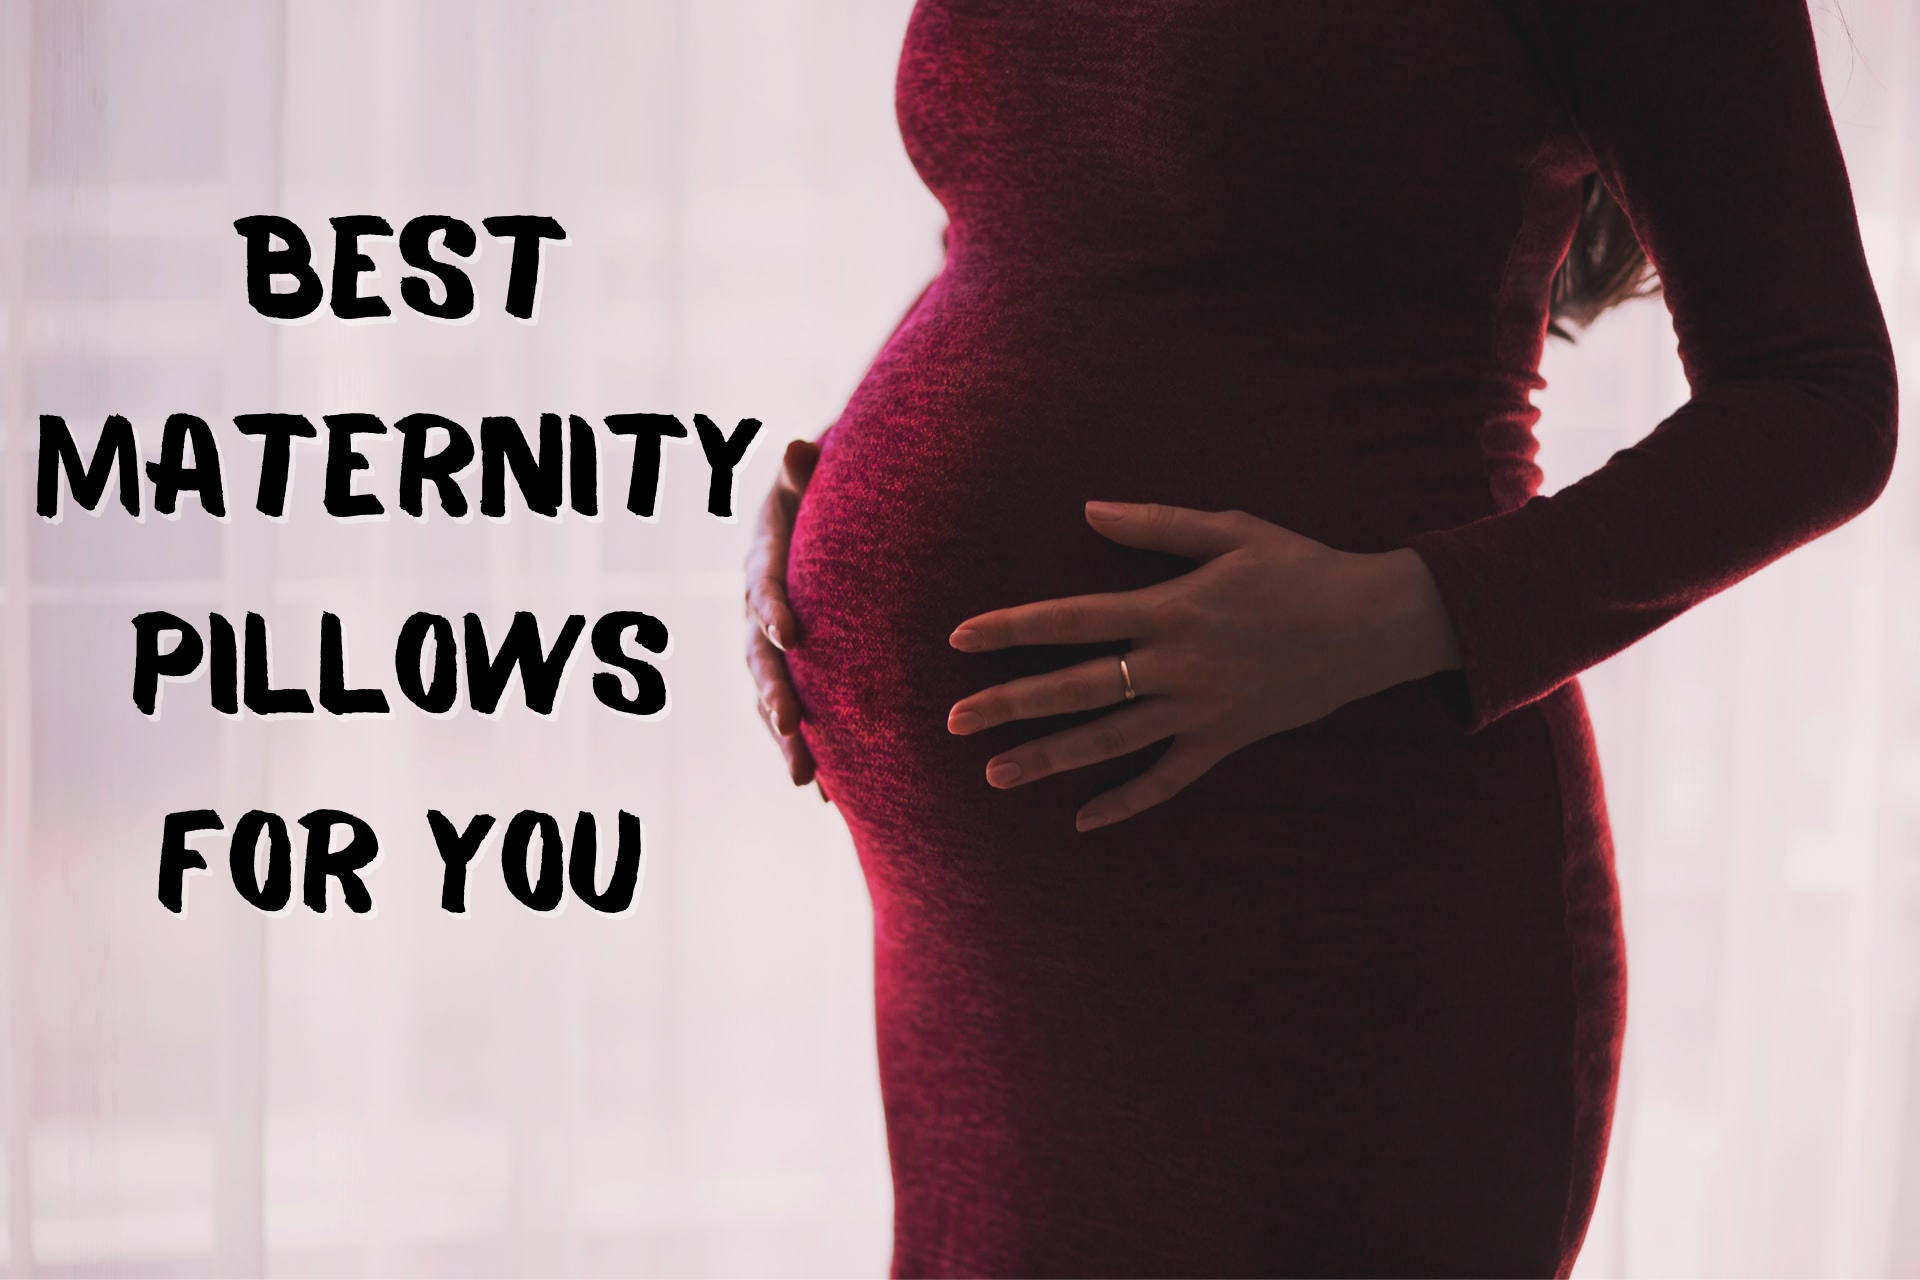 Best Maternity Pillows For You